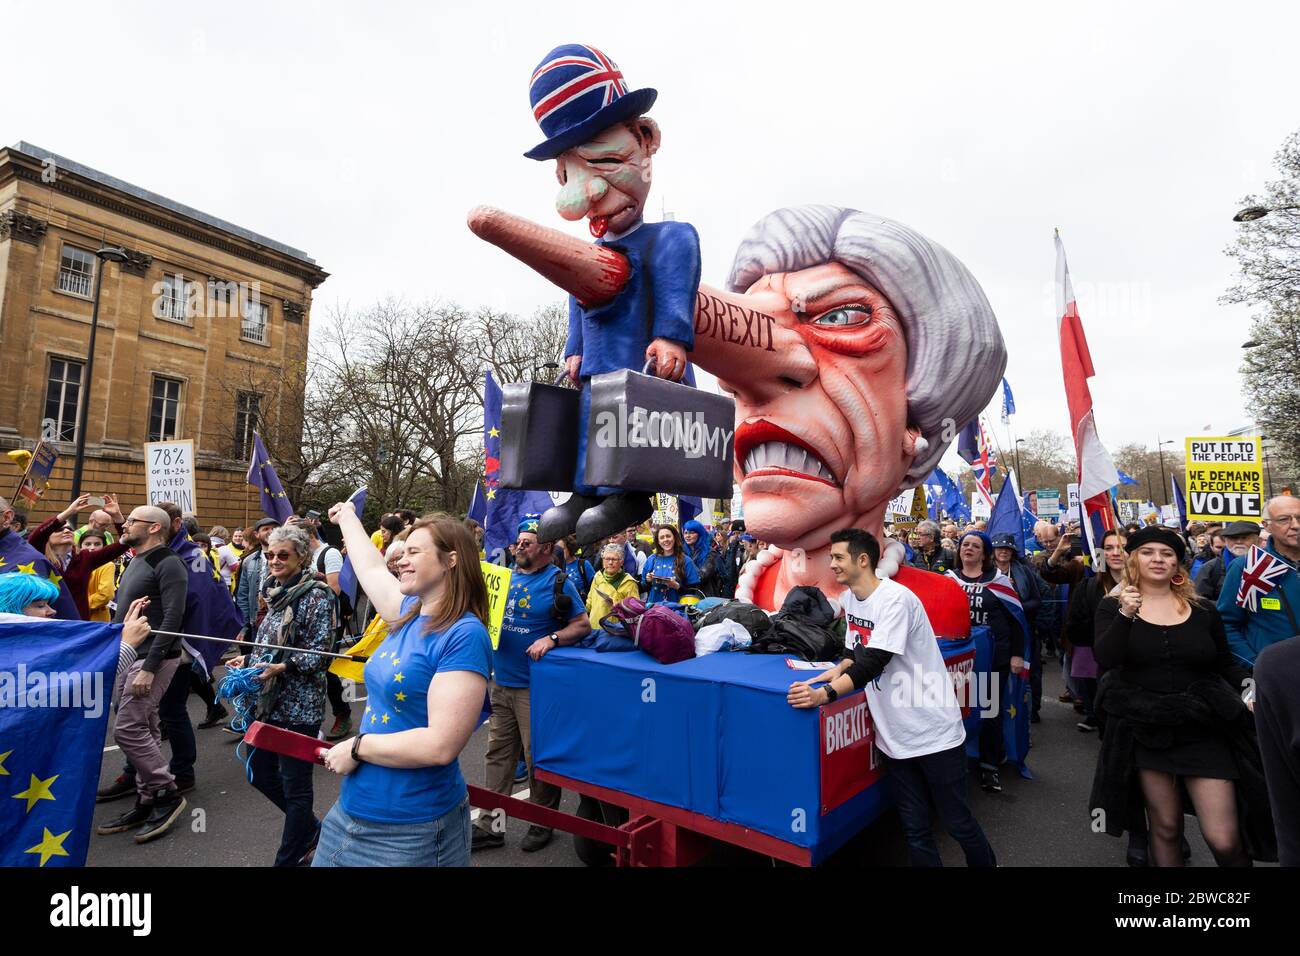 Anti-Brexit demonstration and march, London, 23 March 2019 Stock Photo